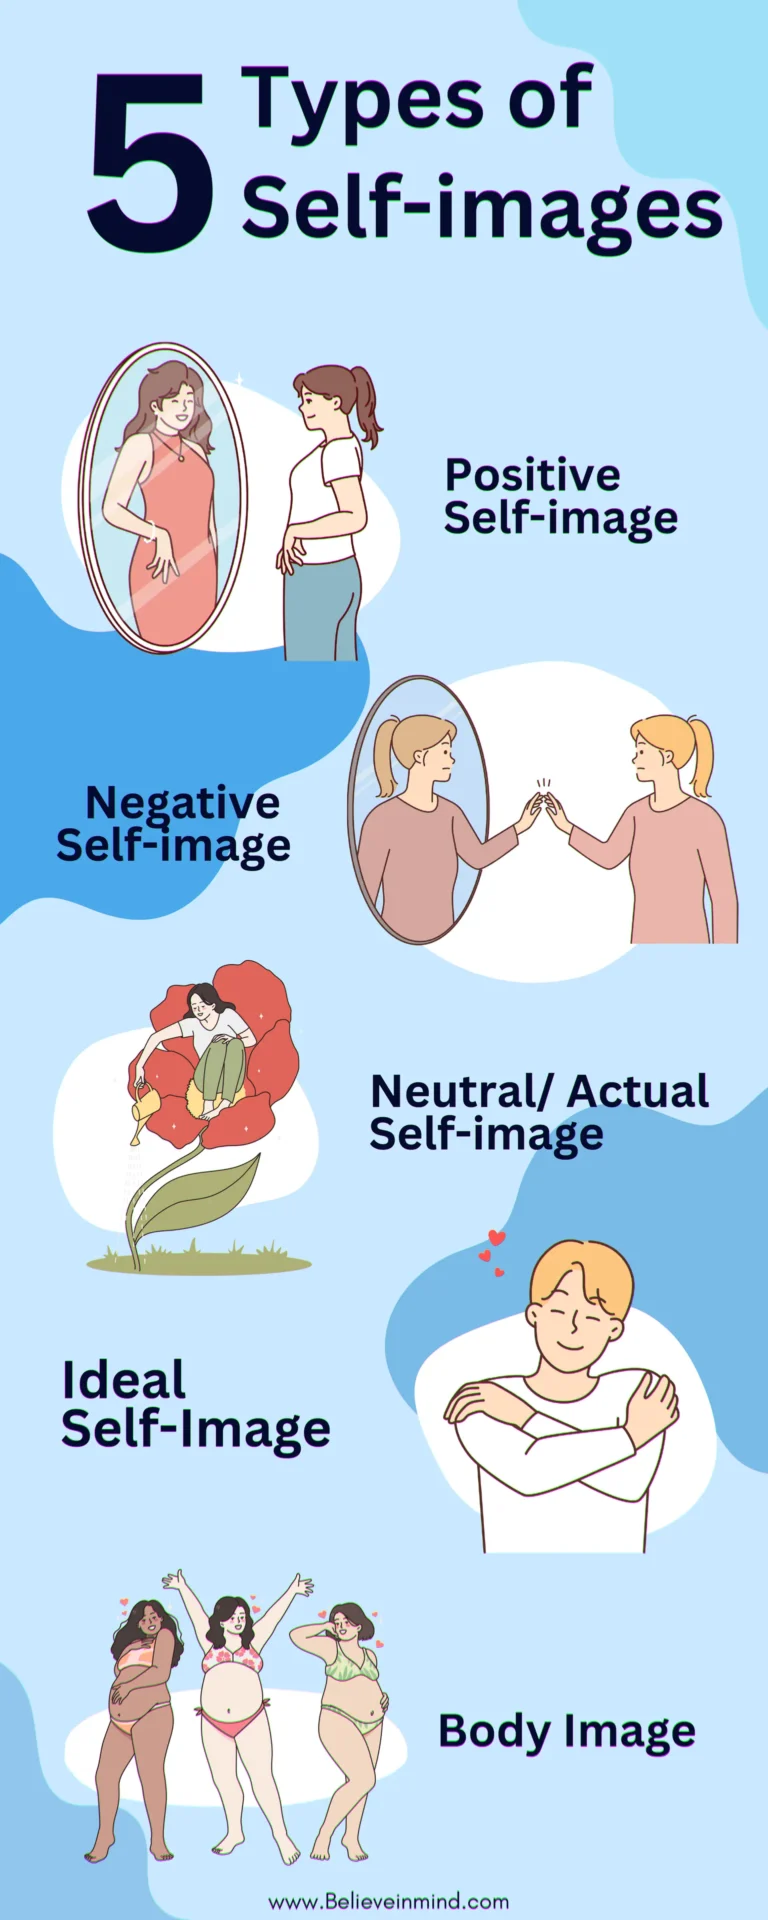 5 Types of Self-images